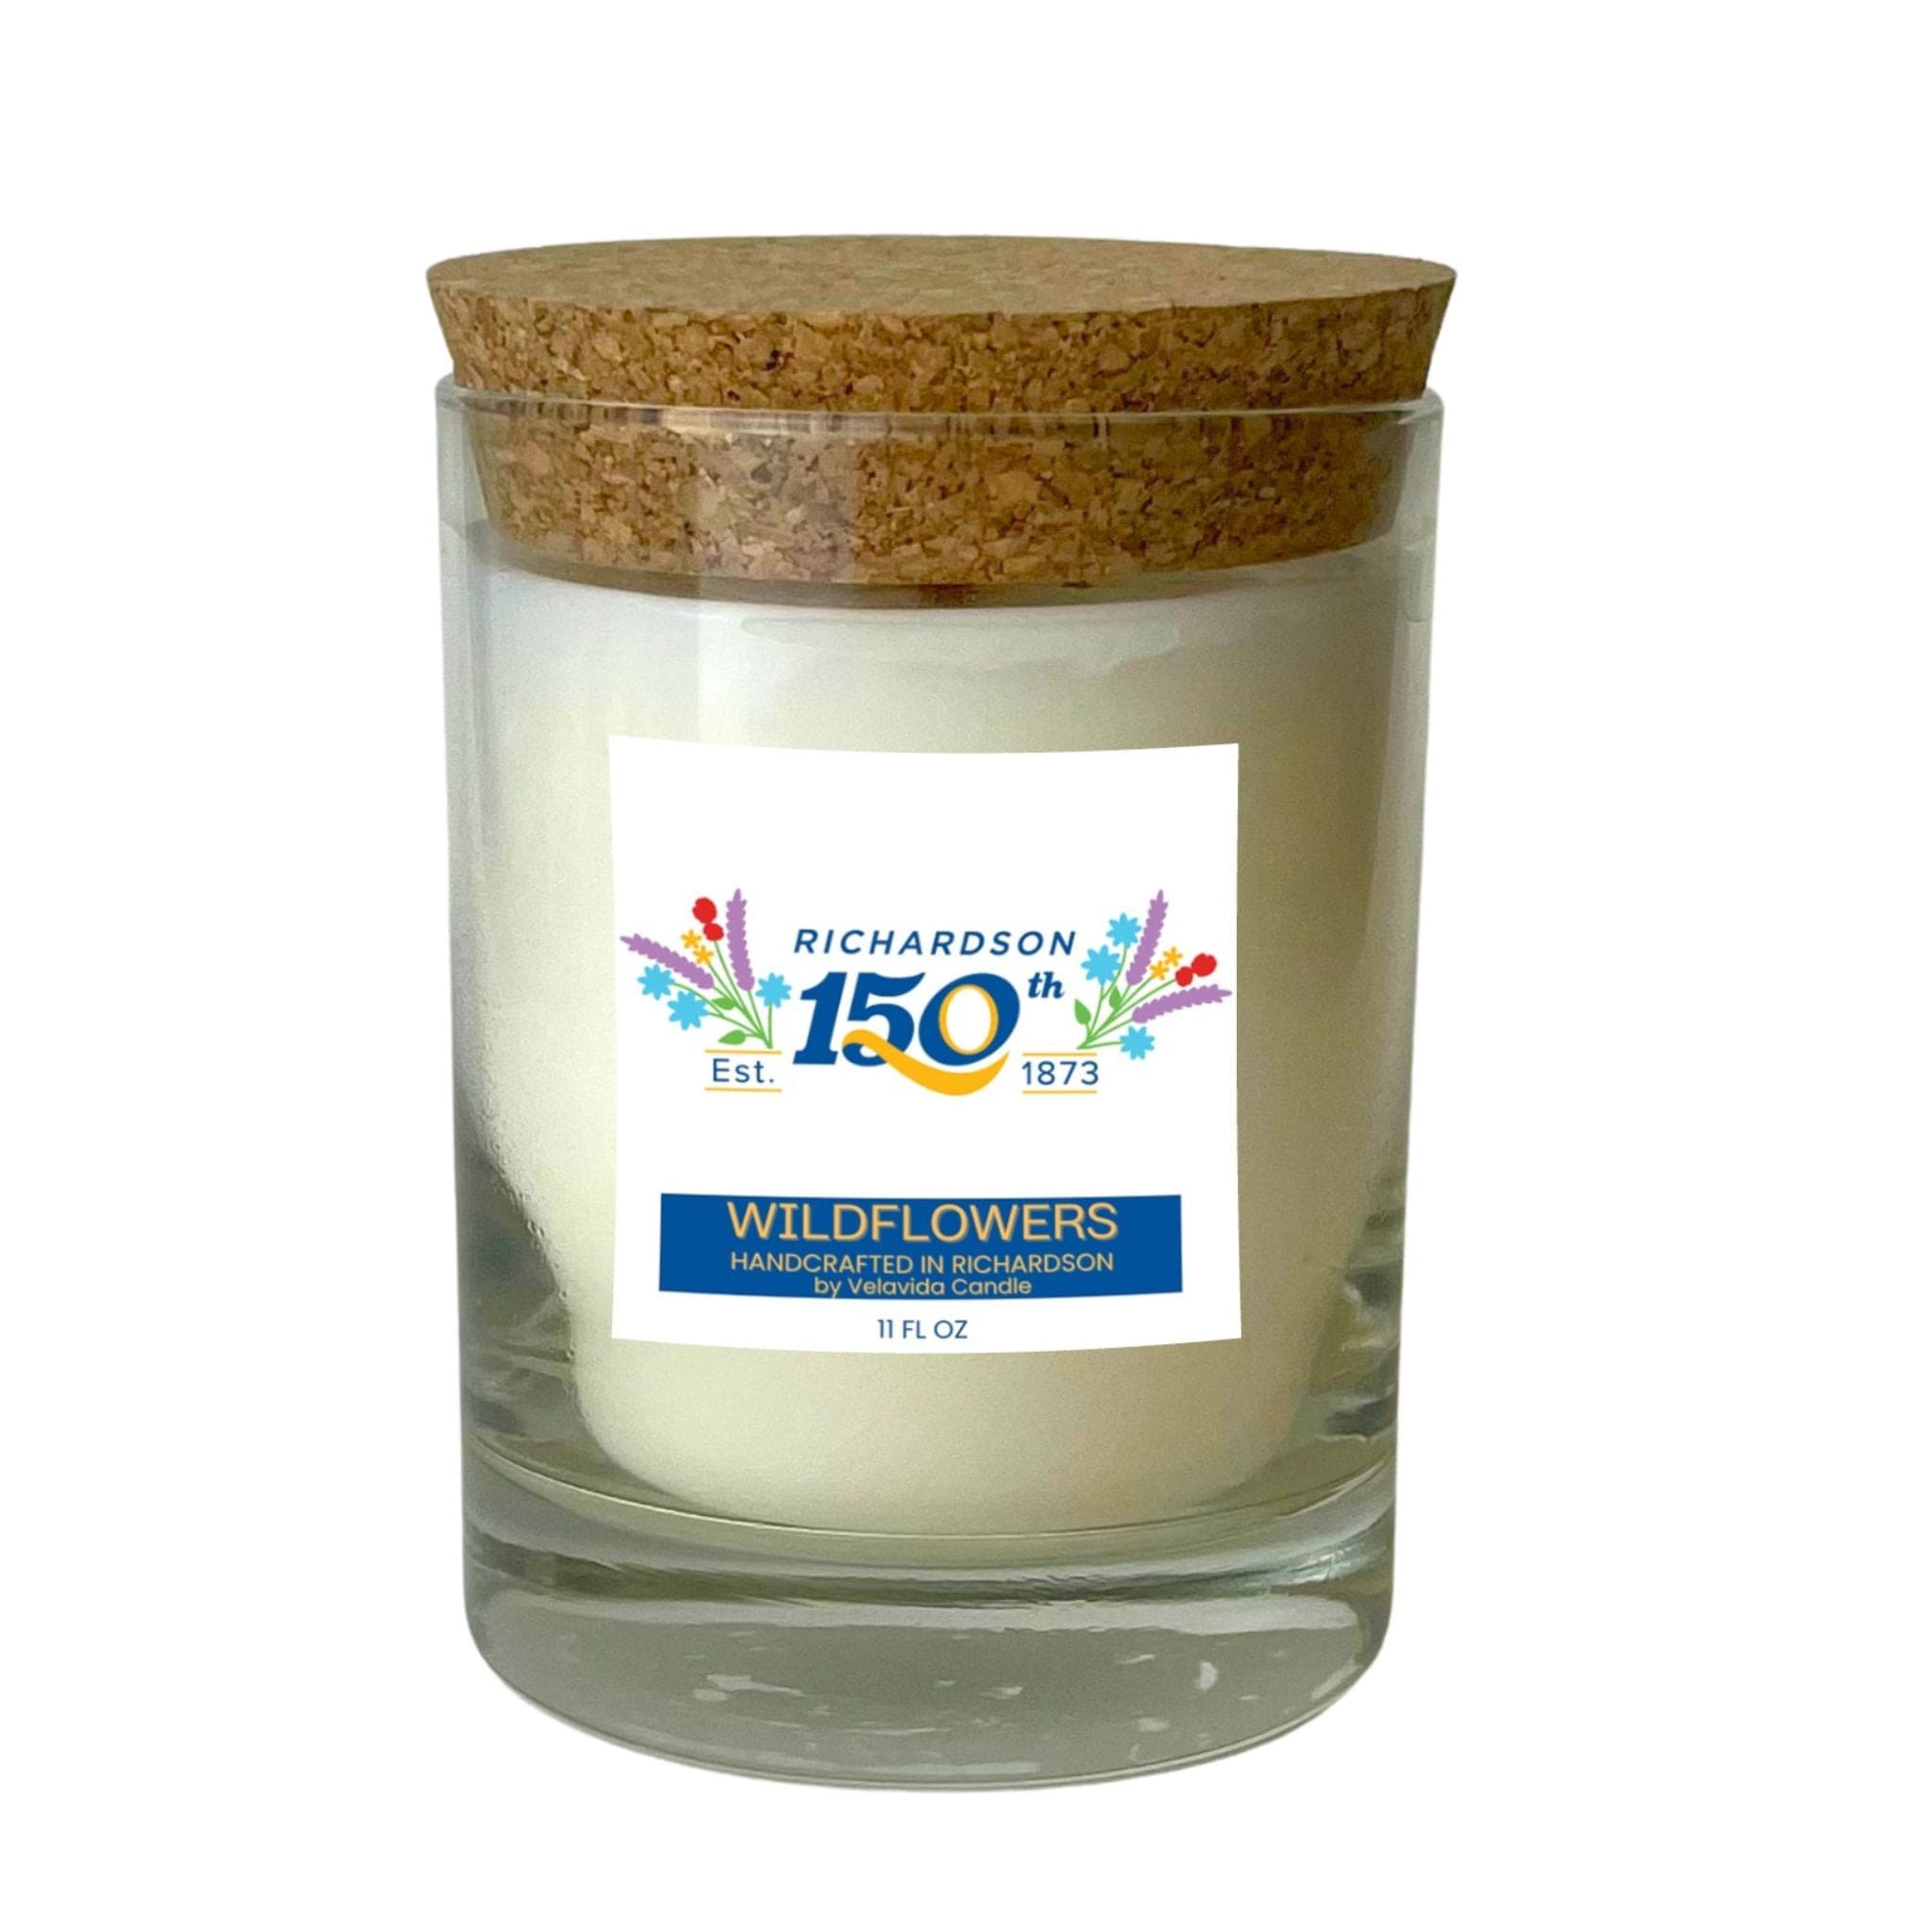 Private Label by Velavida Candles 11 Oz Richardson 150 Anniversary Wholesale Candles